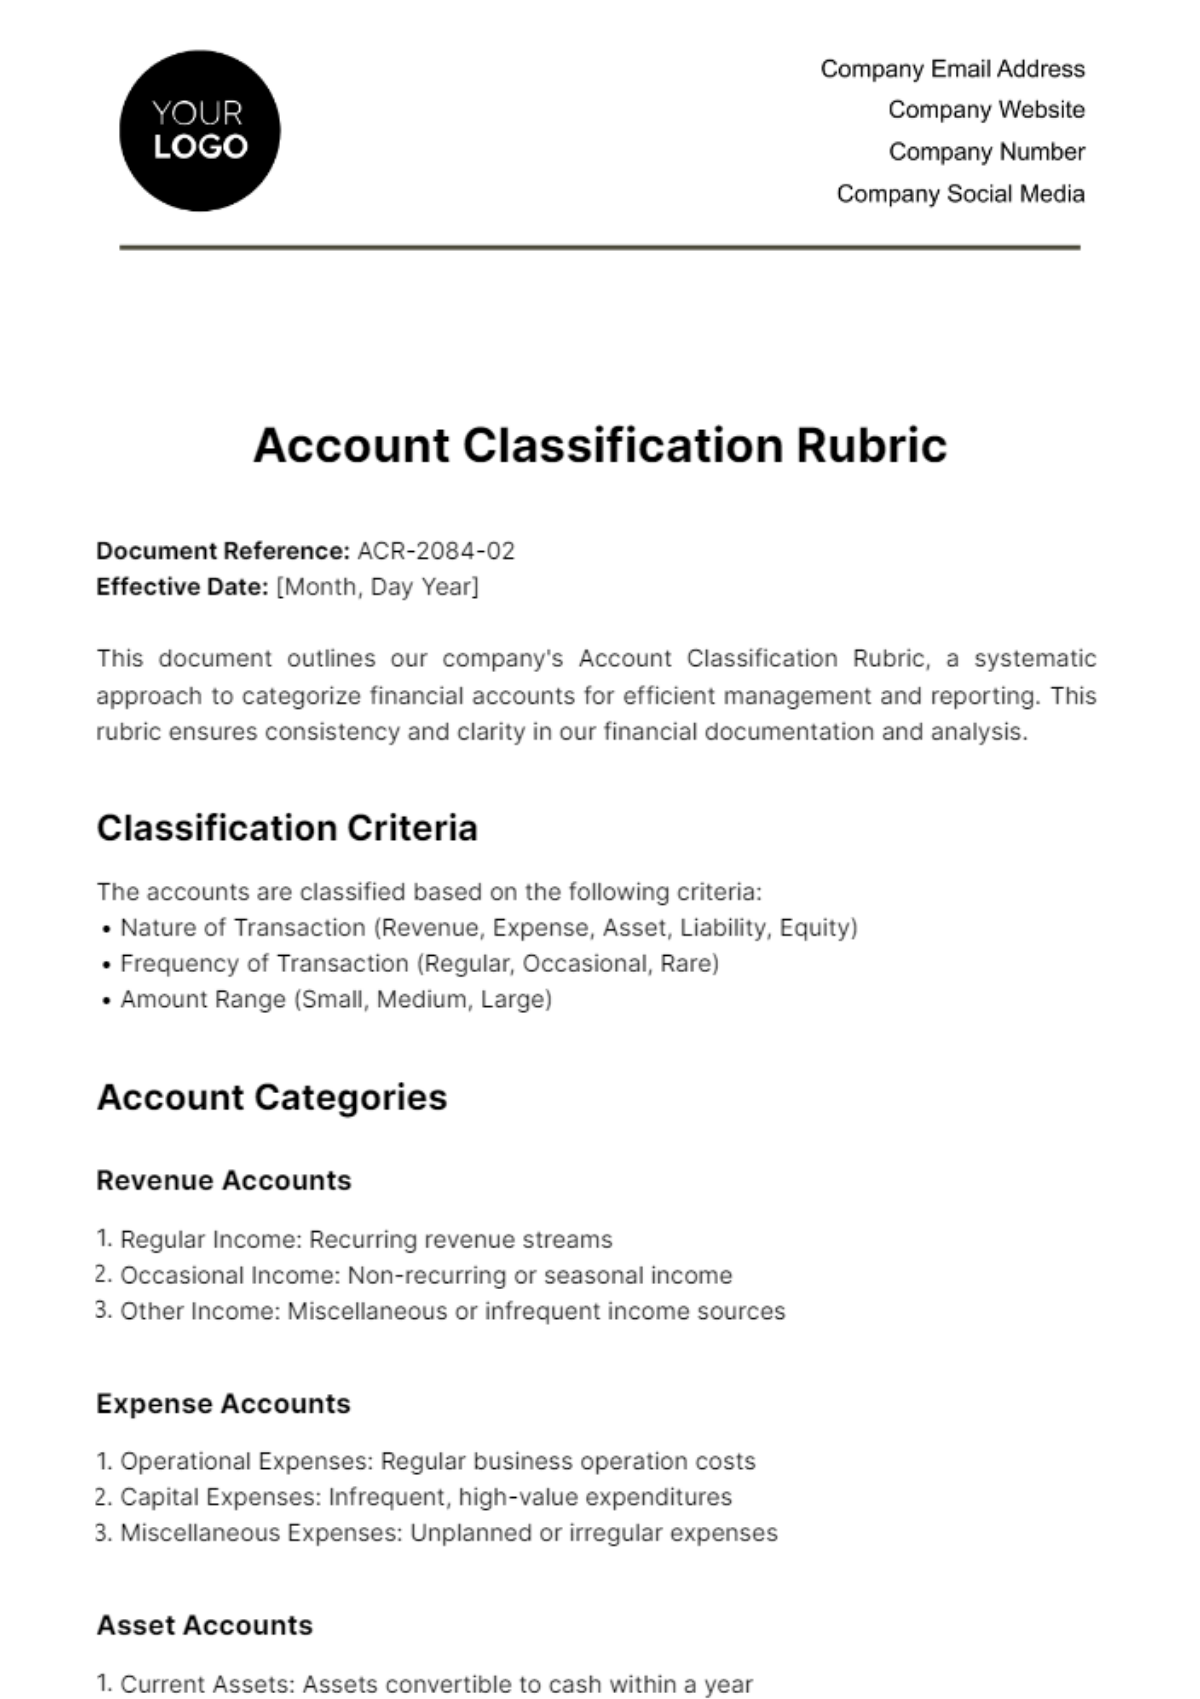 Free Account Classification Rubric Template